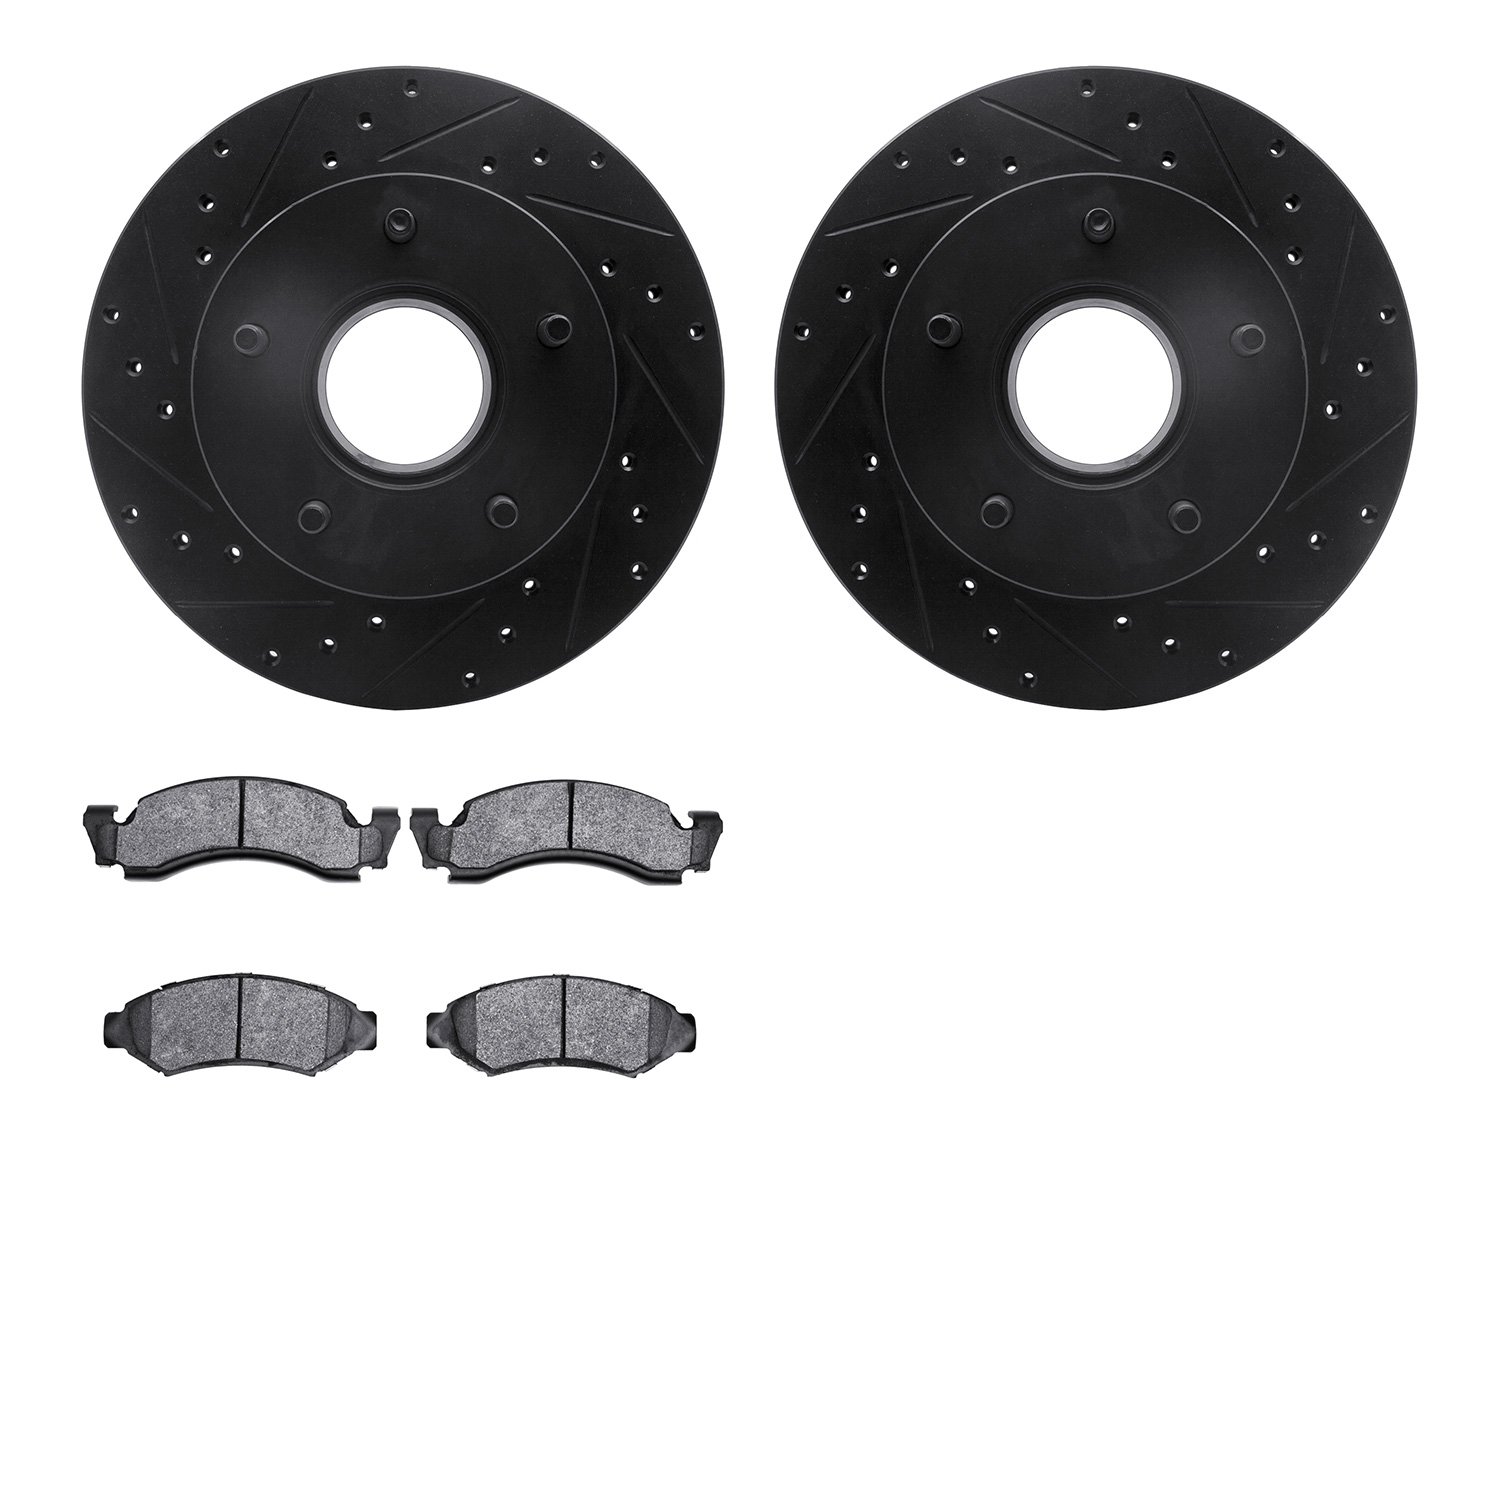 8402-54014 Drilled/Slotted Brake Rotors with Ultimate-Duty Brake Pads Kit [Black], 1986-1988 Ford/Lincoln/Mercury/Mazda, Positio